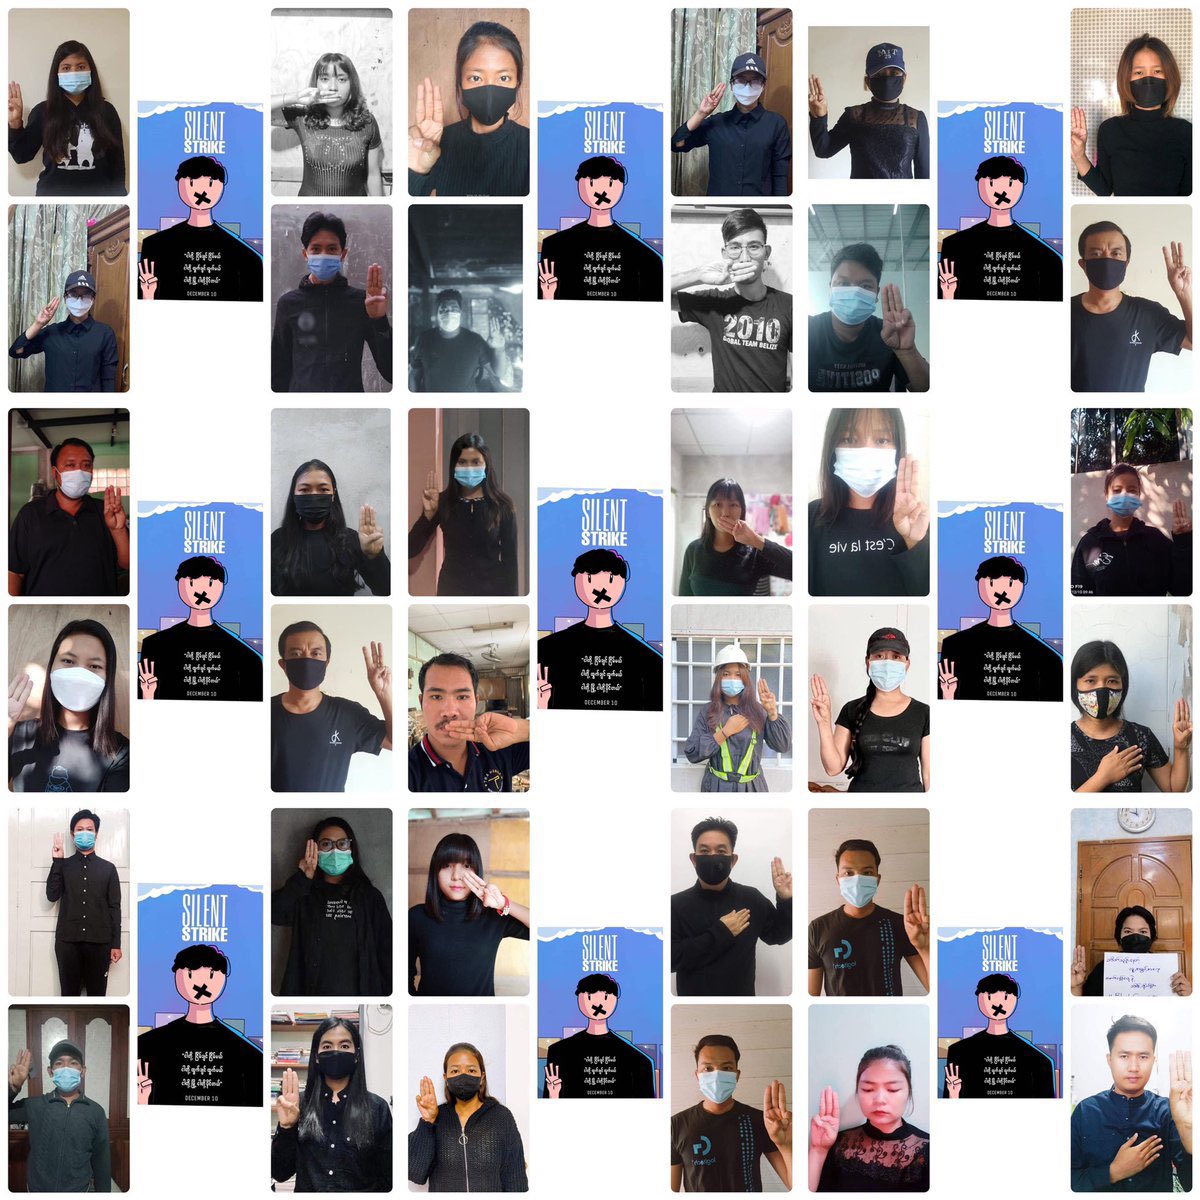 Myanmar Engineer group also launched the Black shirt campaign in defiance of dictatorial orders to express their missing human rights, today. #SilentStrike #OurCityOurRules #Dec10Coup #WhatsHappeningInMyanmar